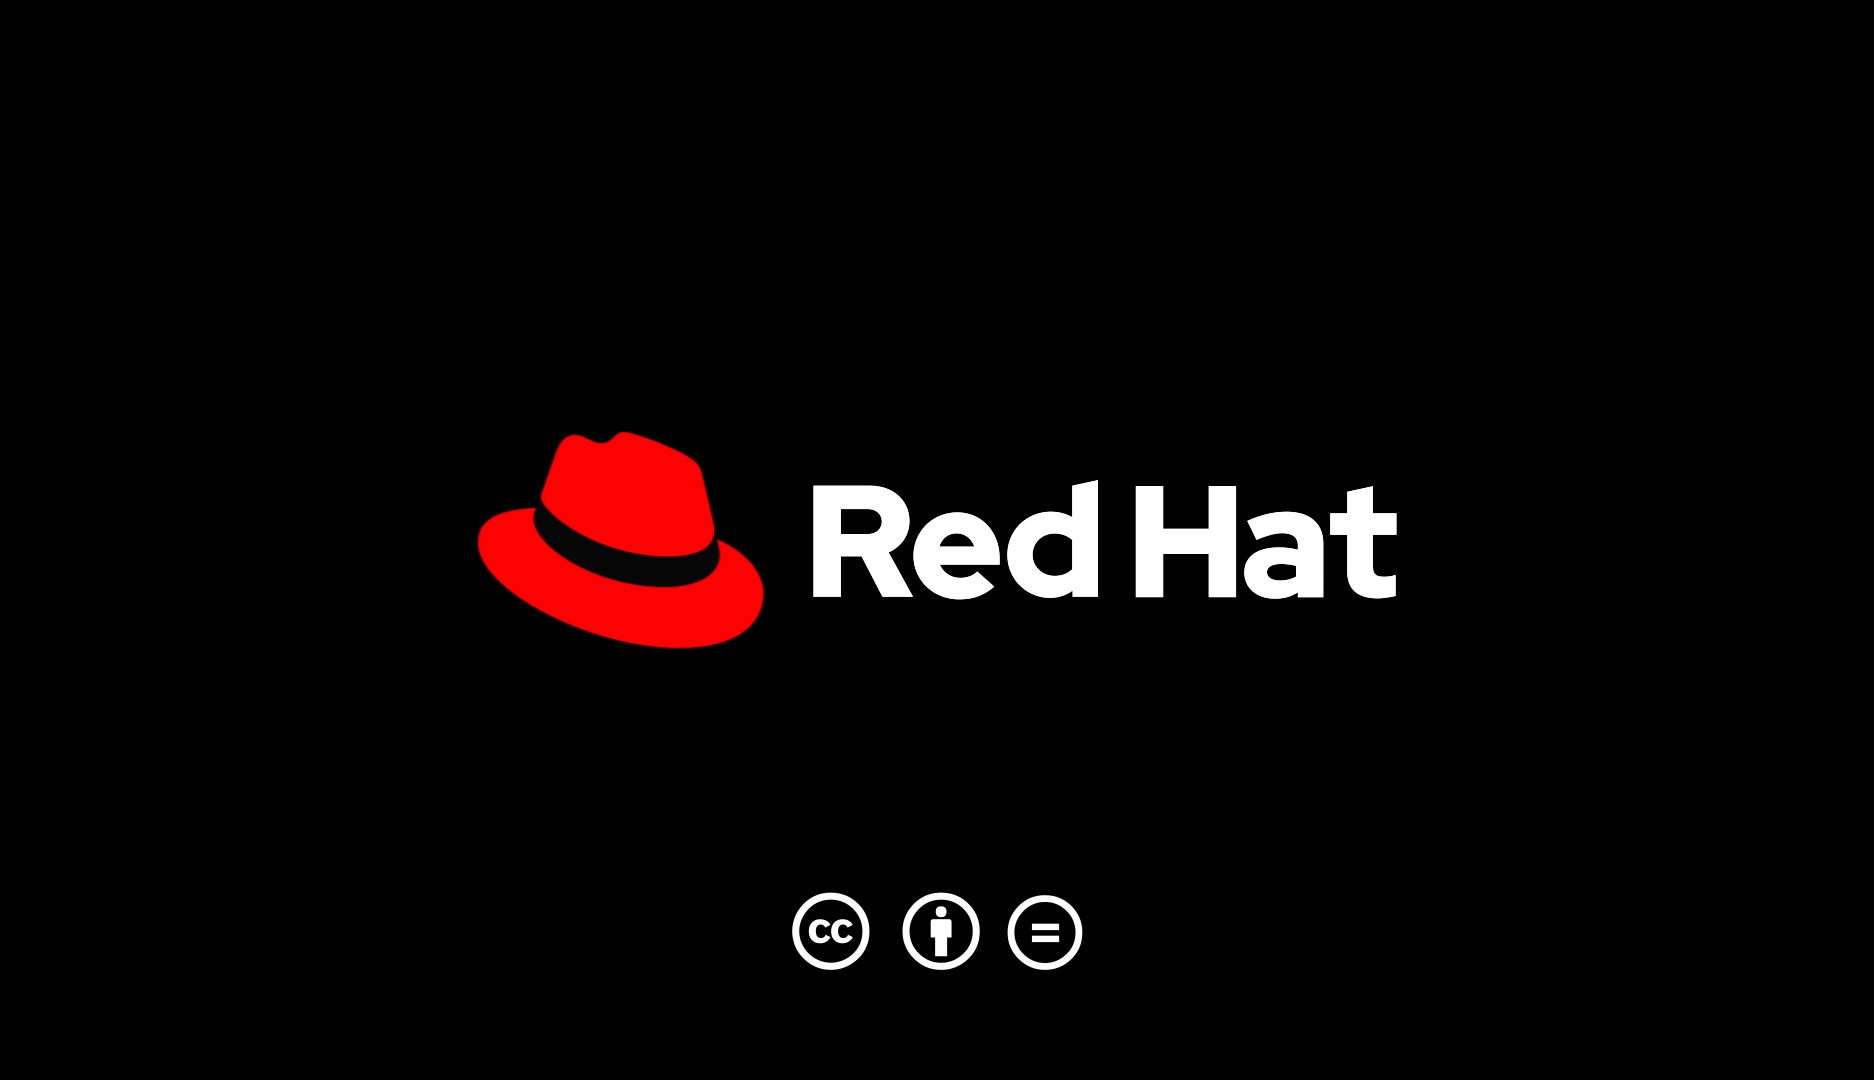 Screenshot of the Red Hat video outro, featuring the Red Hat logo and Creative Commons icons.